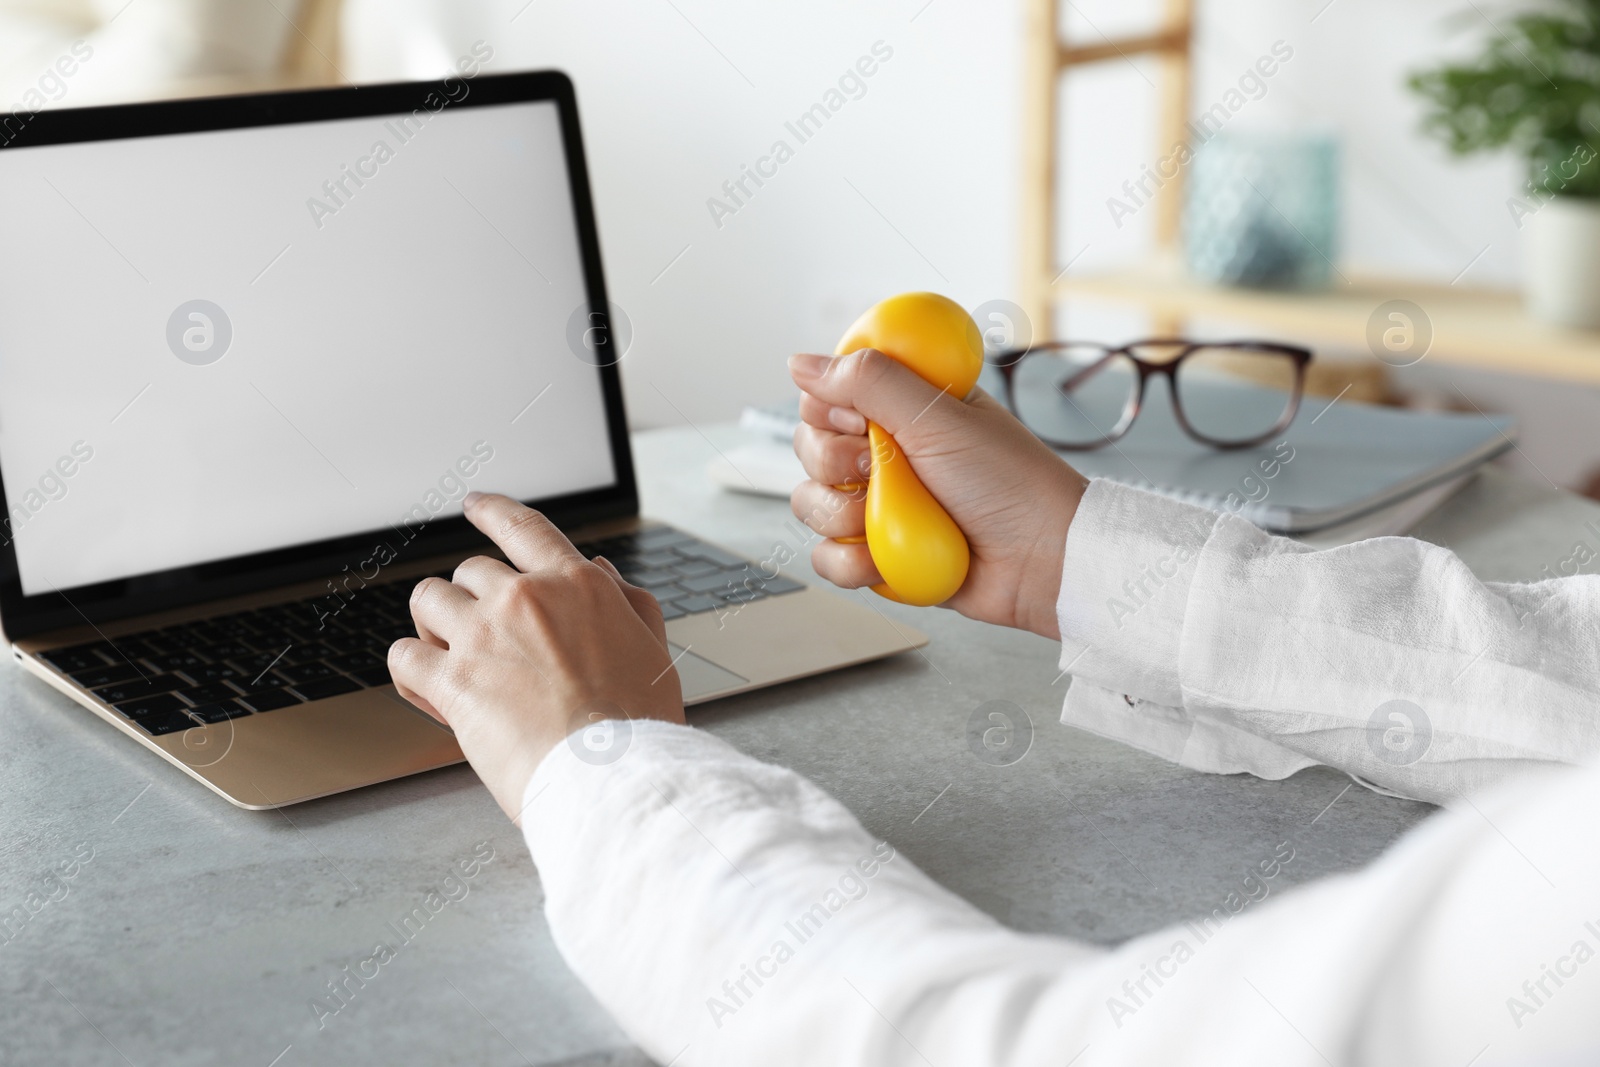 Photo of Woman squeezing antistress ball while working on laptop in office, closeup